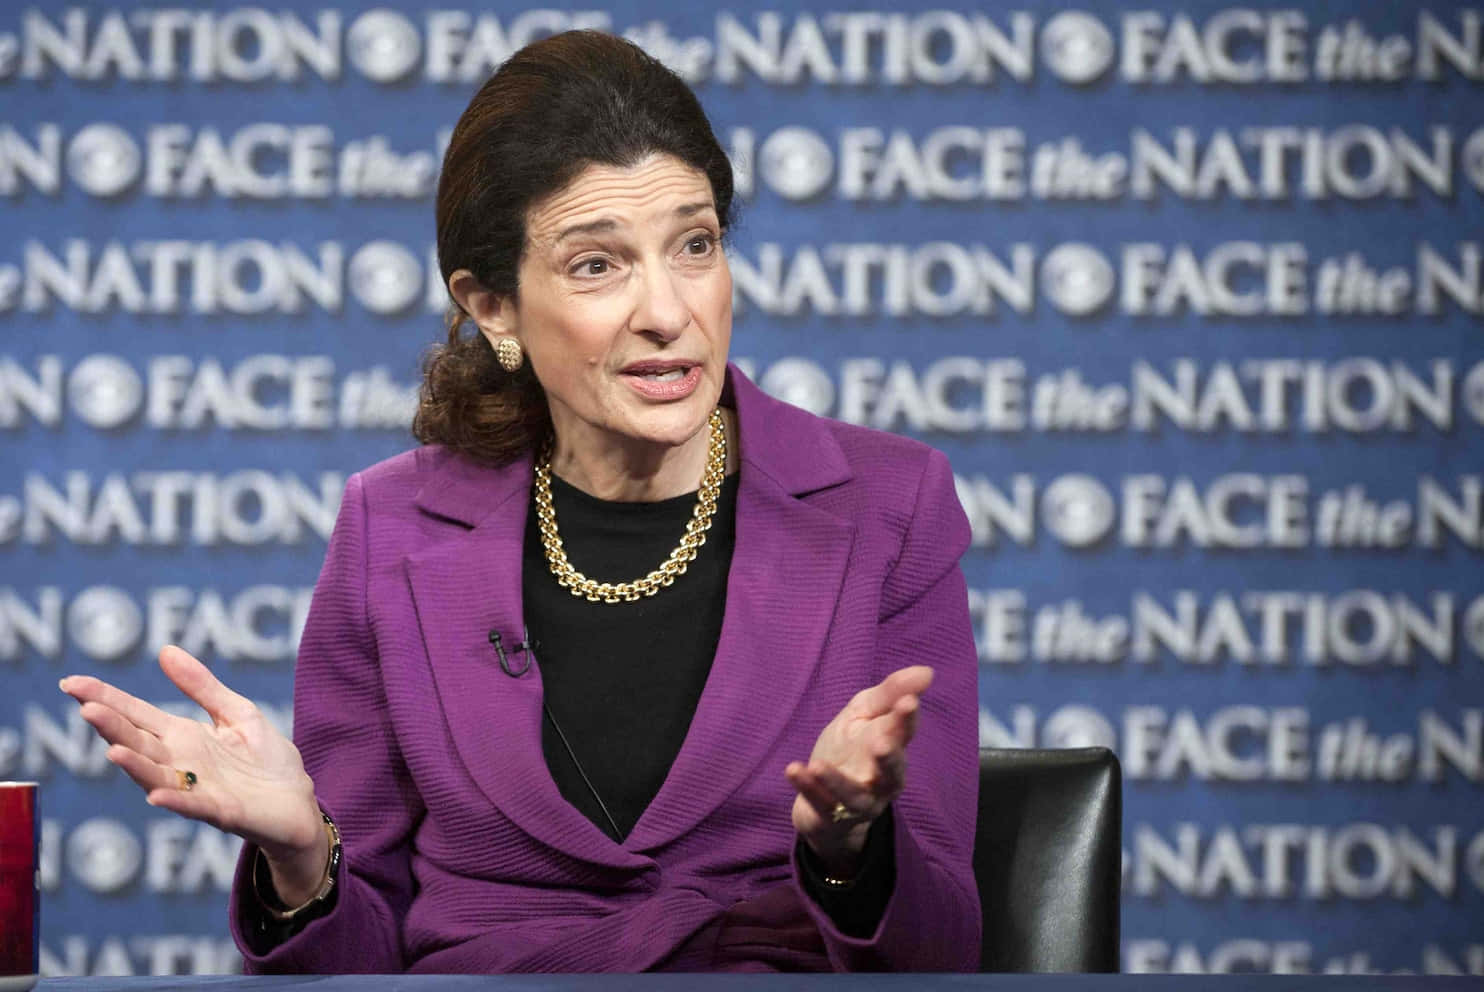 Olympia Snowe during an appearance on Face the Nation Wallpaper